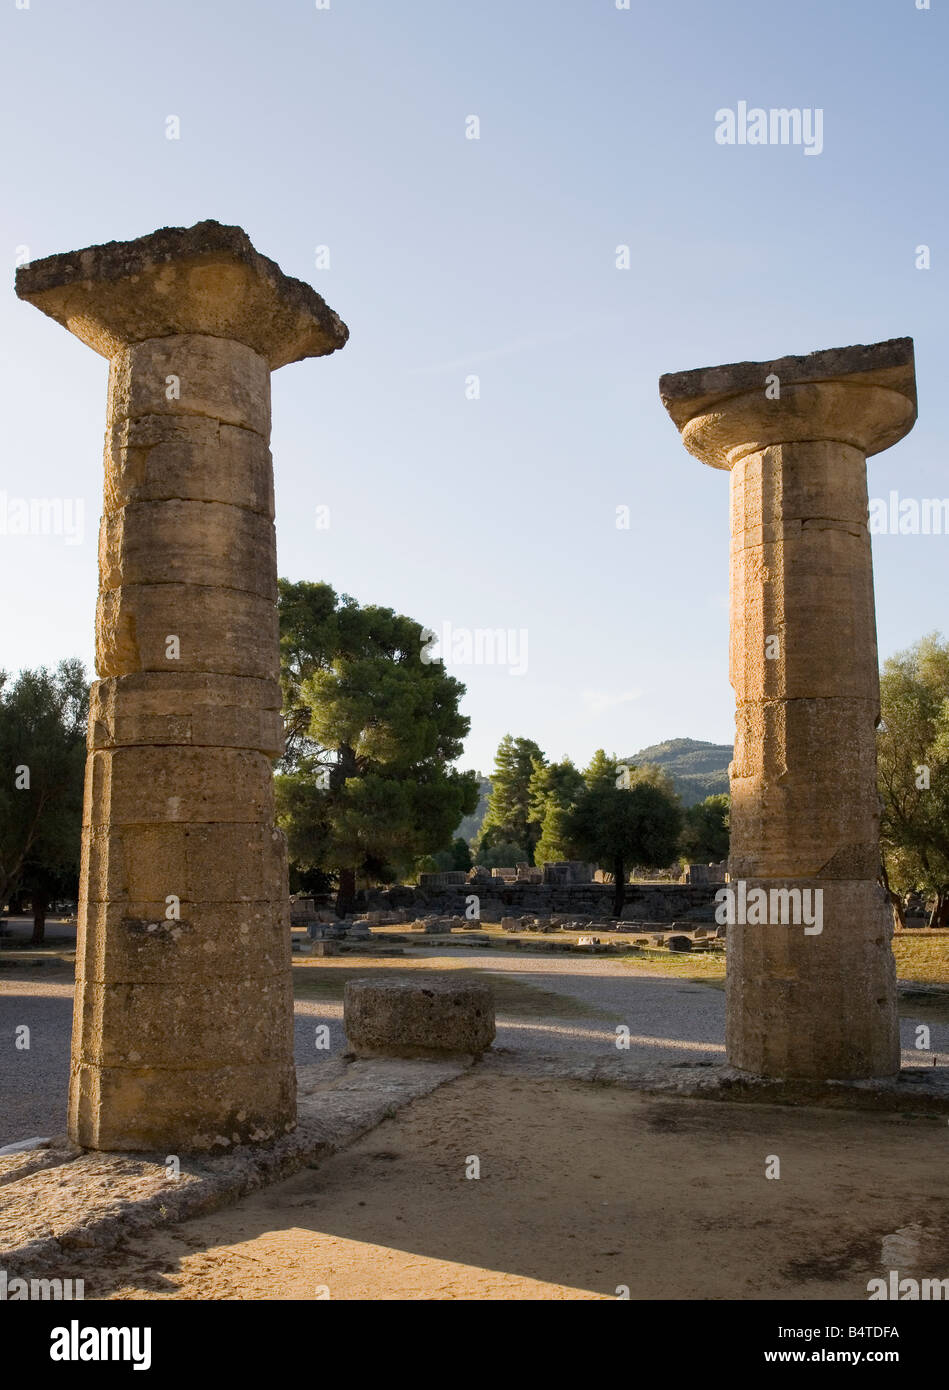 Heraion Temple Columns and Temple of Zeus beyond Sanctuary of Olympia Peloponnese Greece Stock Photo